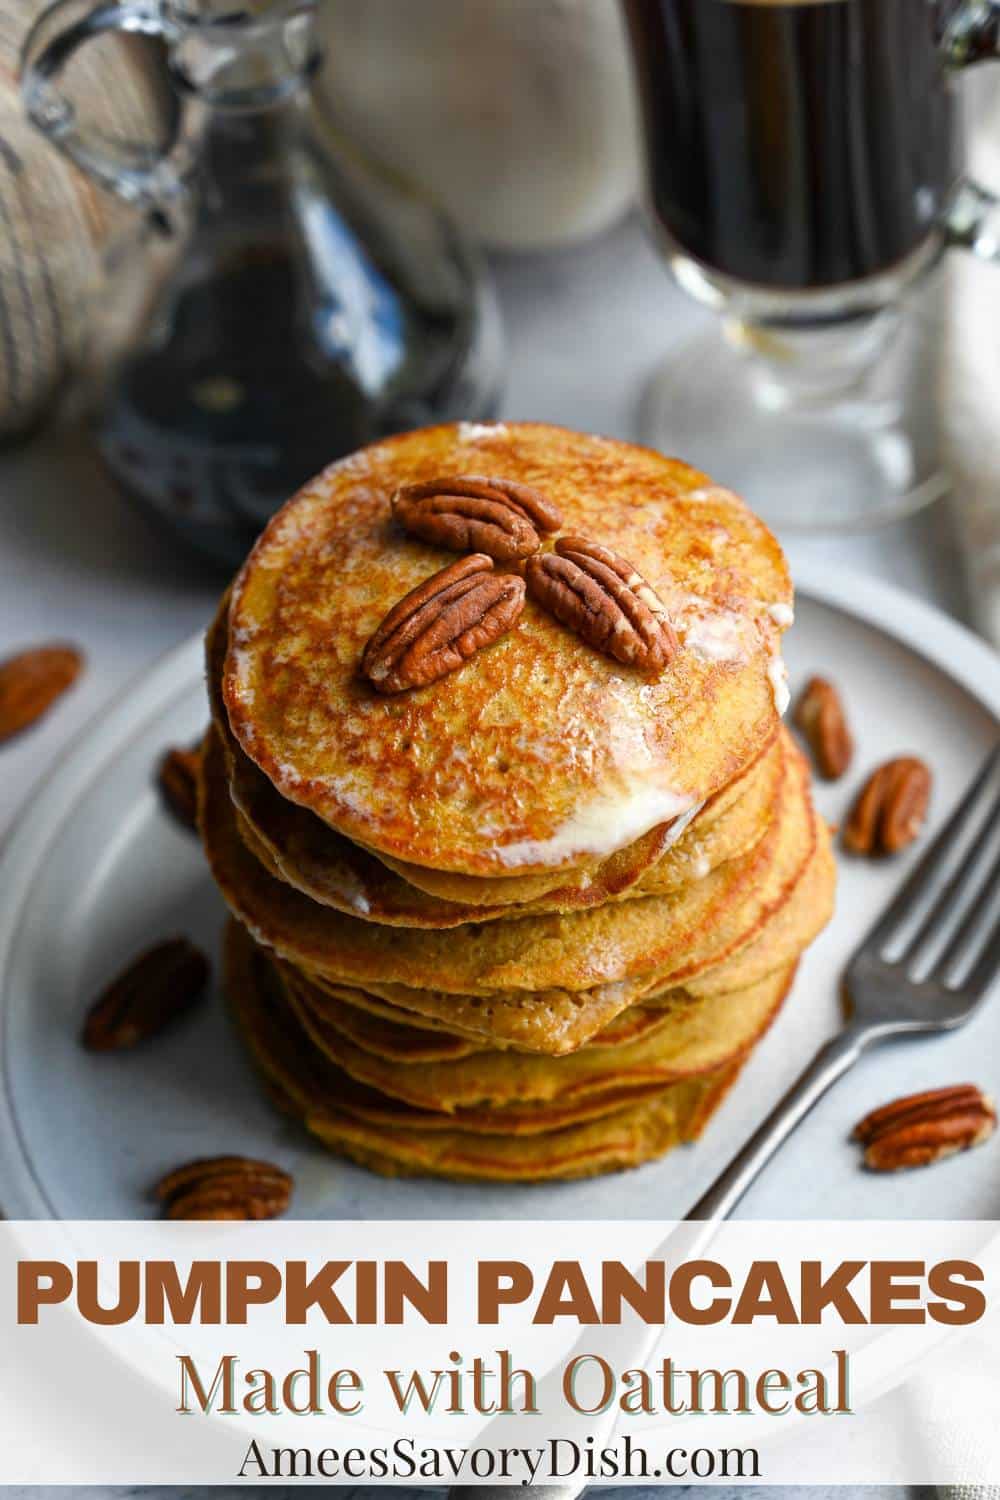 These pumpkin pancakes are wholesome and delicious using canned pumpkin and oat flour ground from whole oats. via @Ameessavorydish